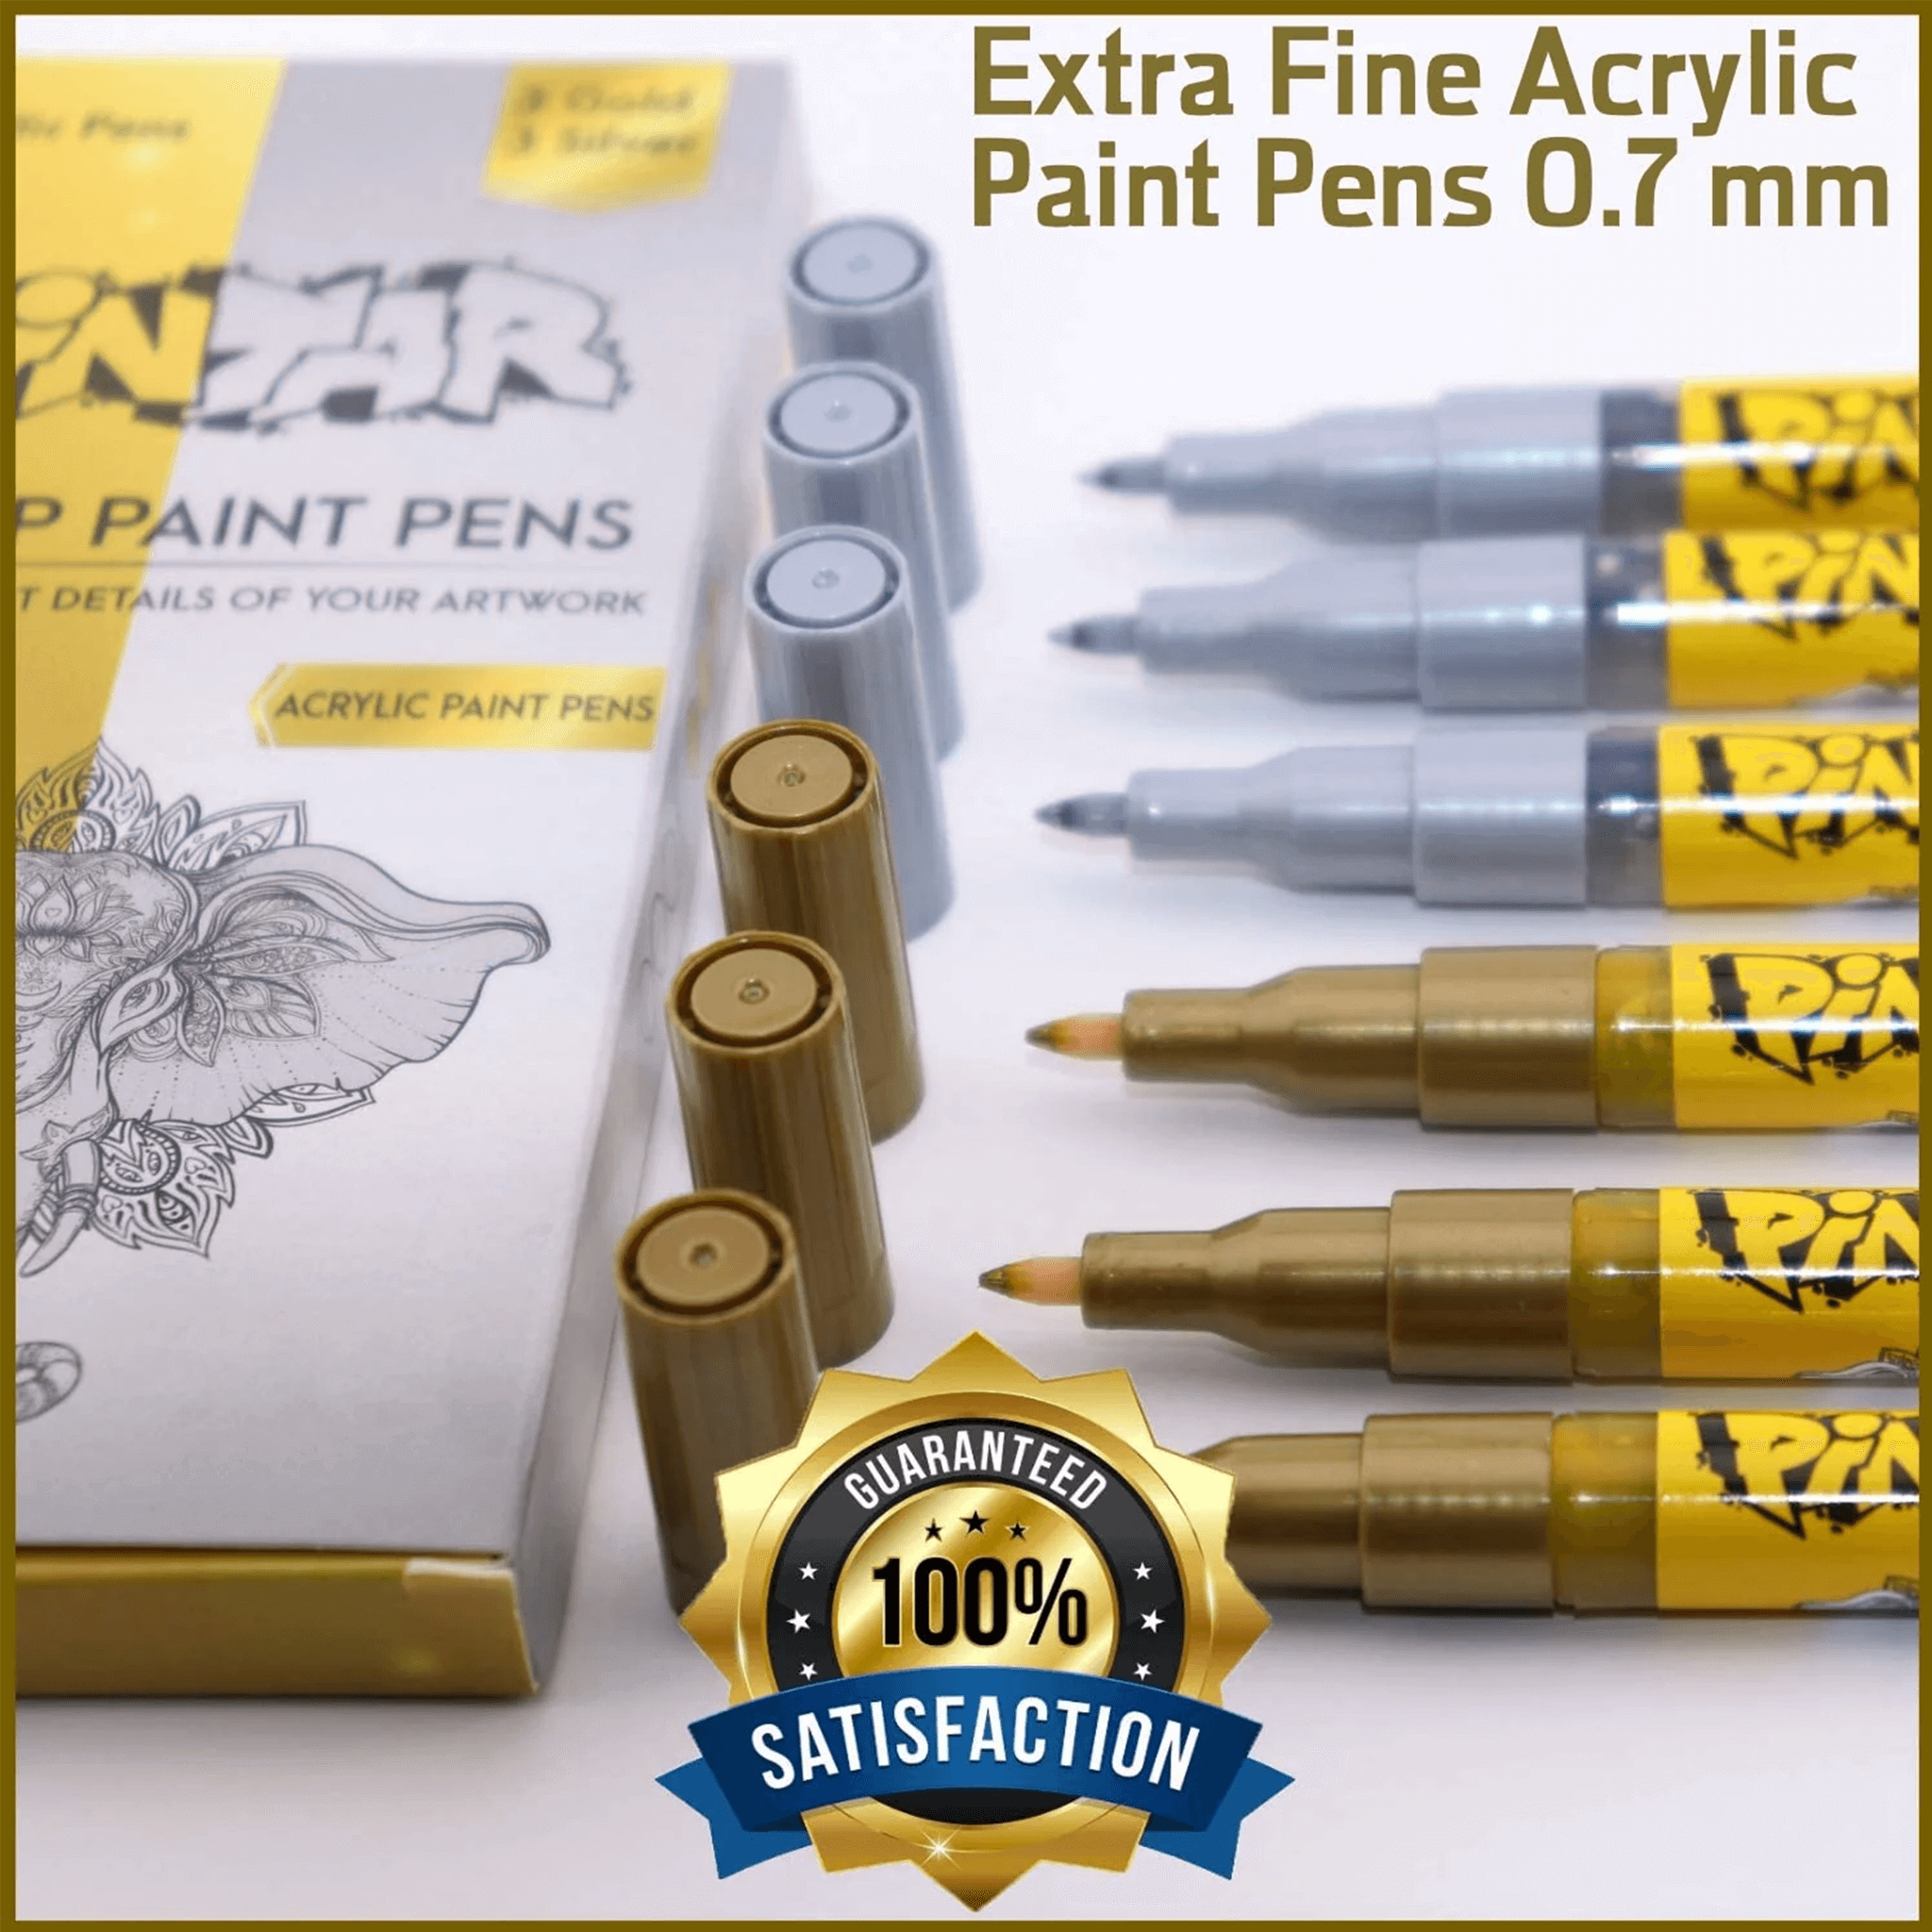 EARTH & SKIN Acrylic Paint Pens 0.7mm EXTRA FINE Tip: 3-Pack, Your Choice  of Any 1 Color